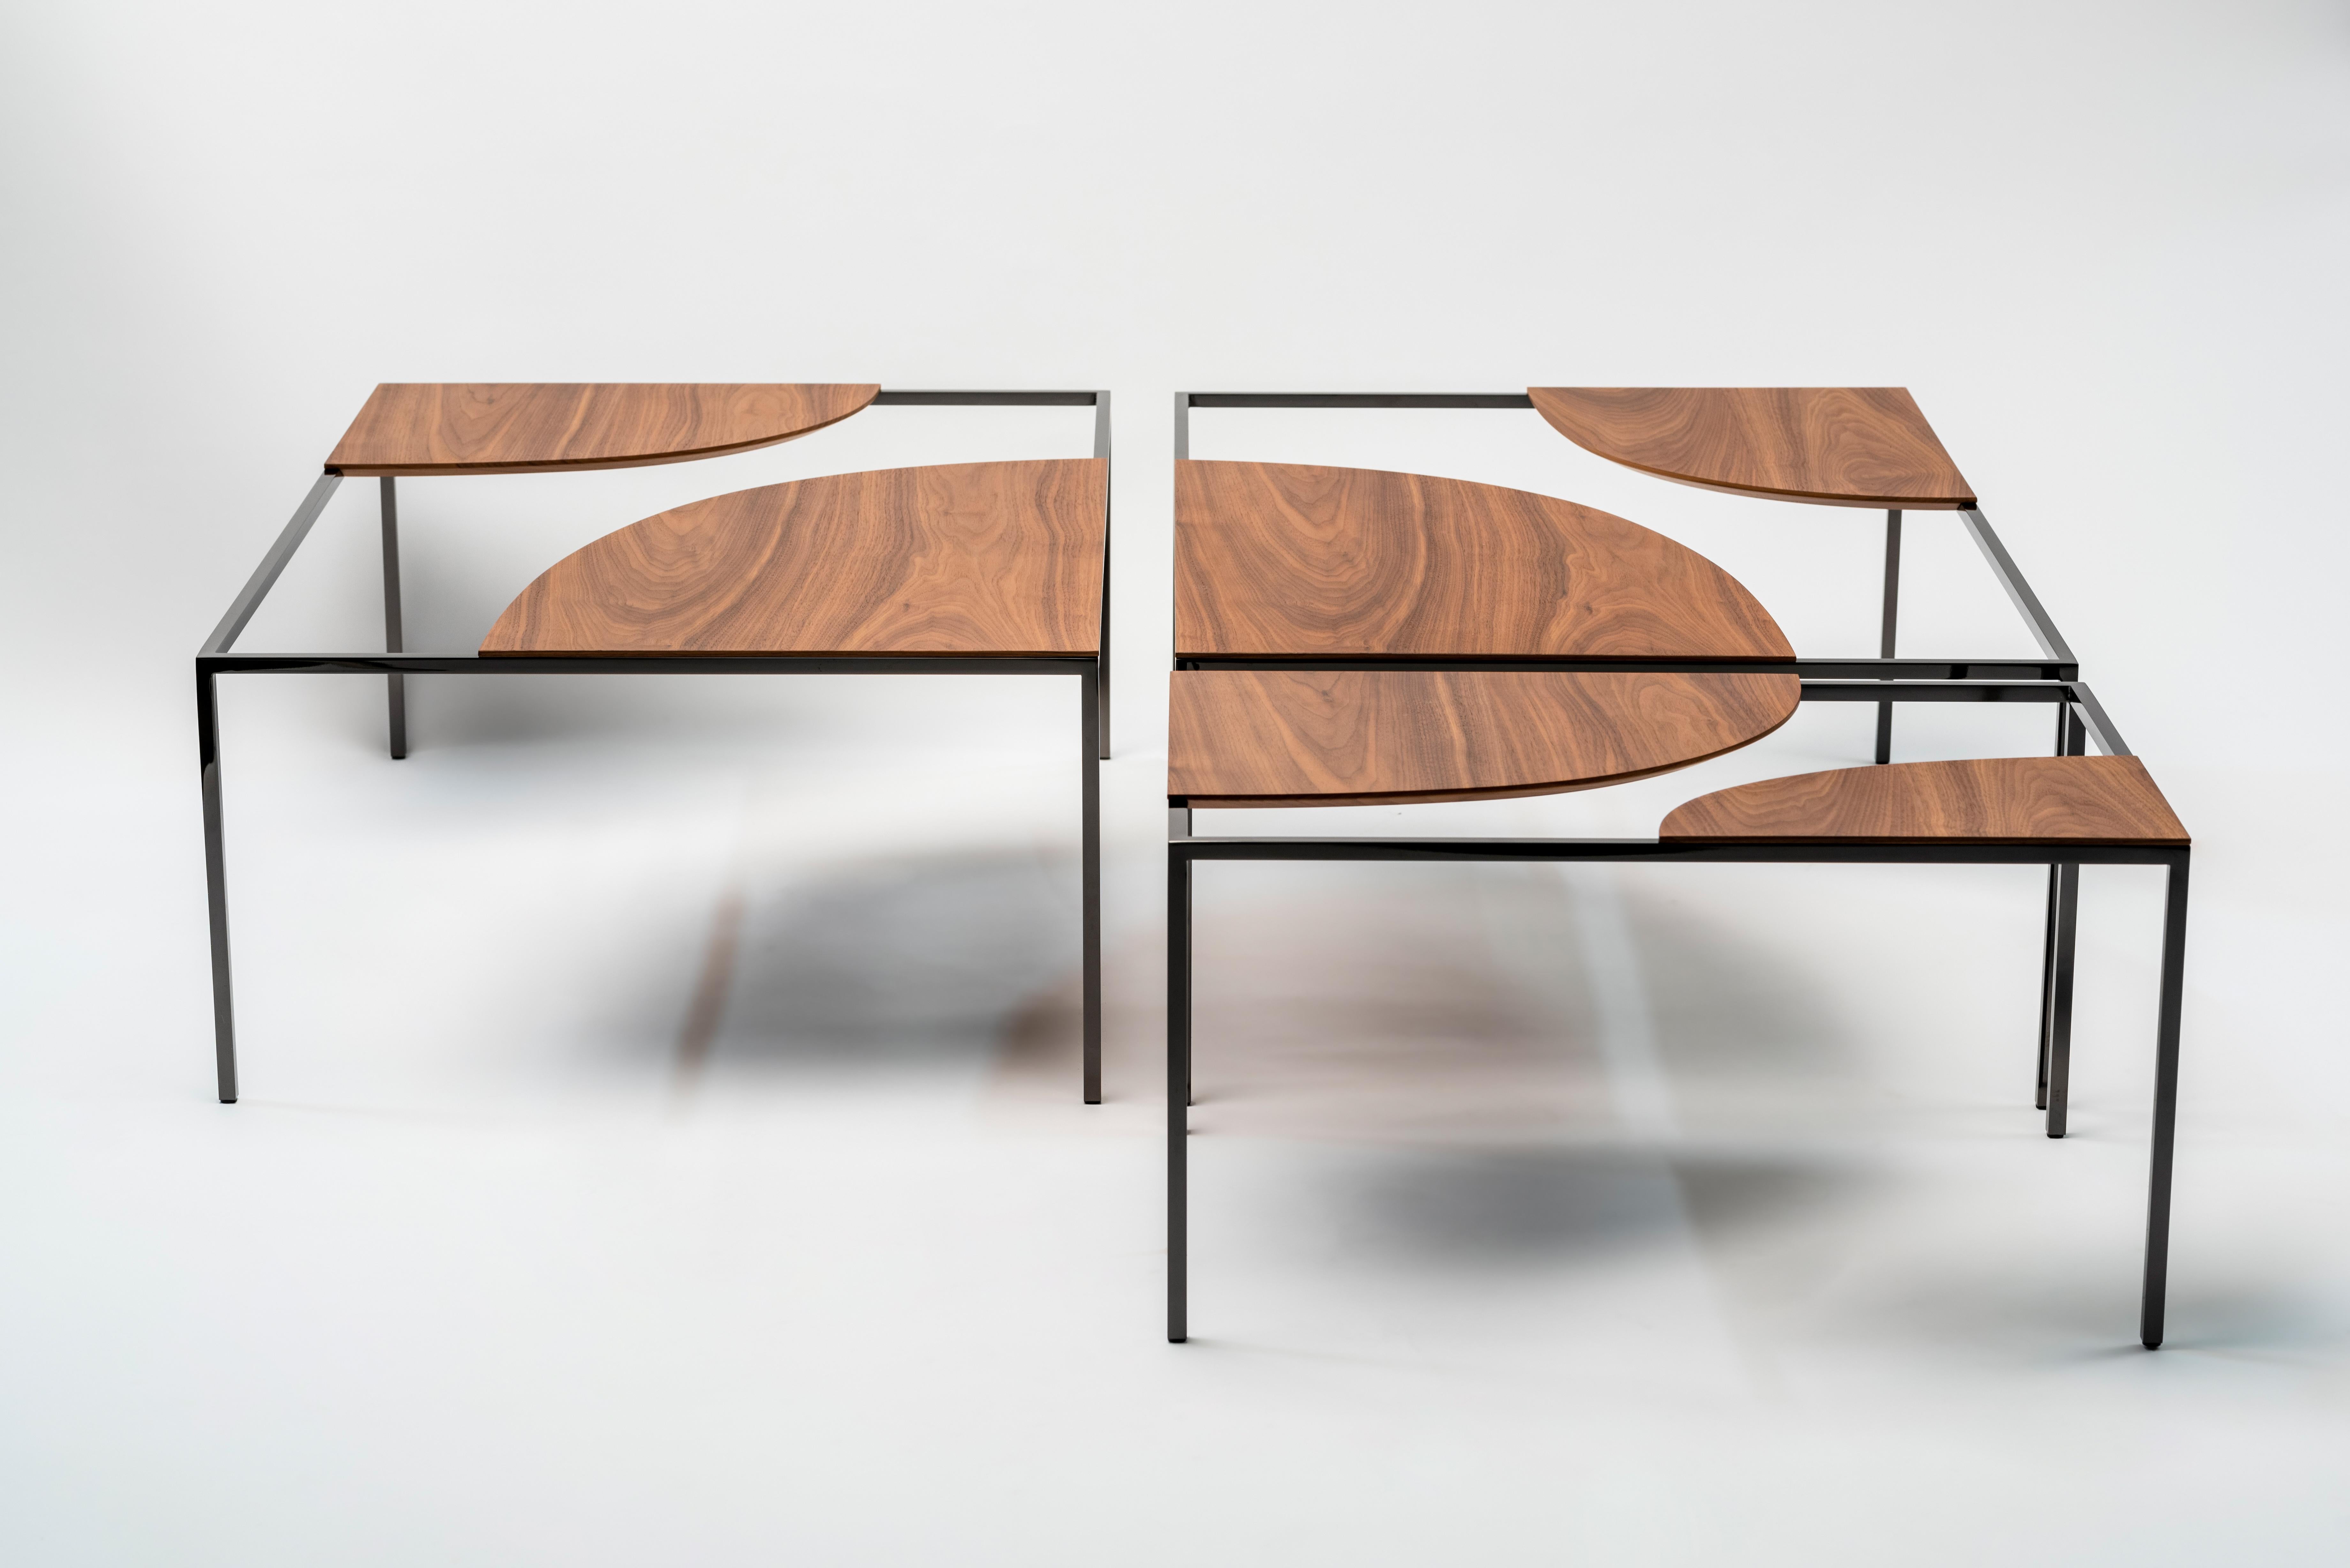 Creek is a table that suggests a stream of water flowing freely across its surface and around islands, circling around the table tops placed in opposite corners.
The tables come in five different sizes and shapes and when placed alongside one